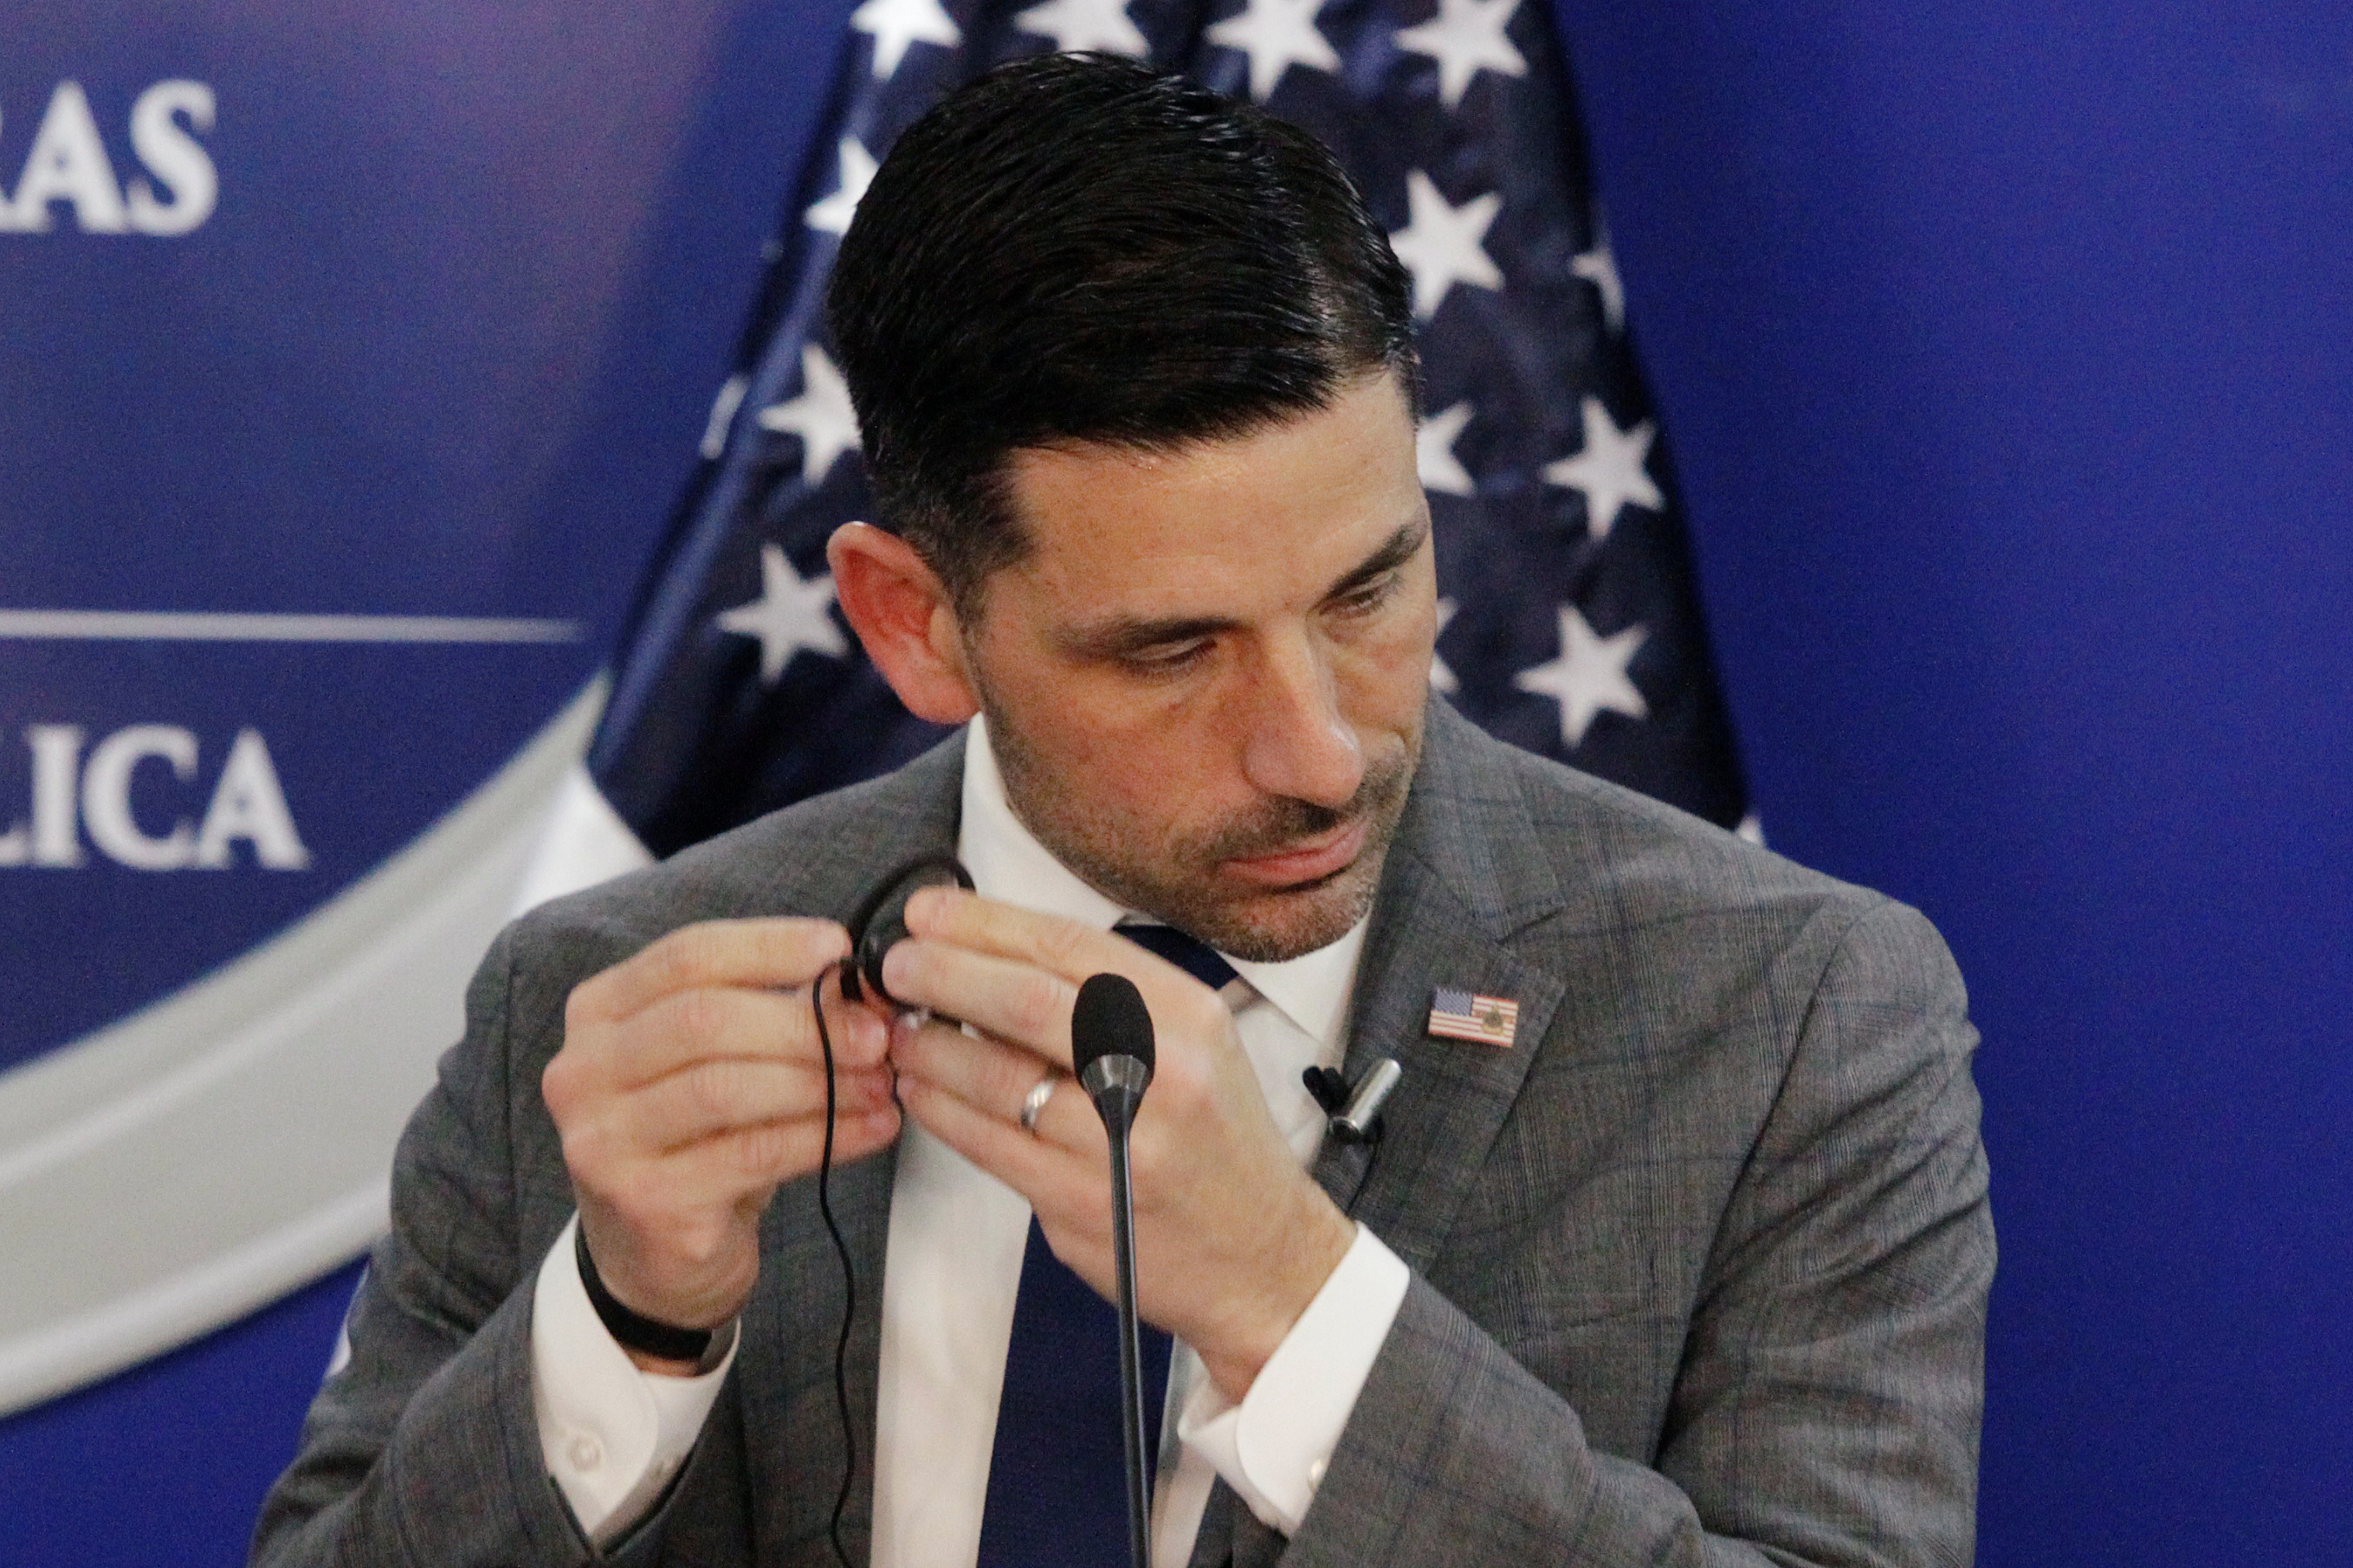 U.S. Department of Homeland Security (DHS) acting Secretary Chad Wolf adjusts an earpiece during a joint message with Honduras' President Juan Orlando Hernandez (not pictured), in Tegucigalpa